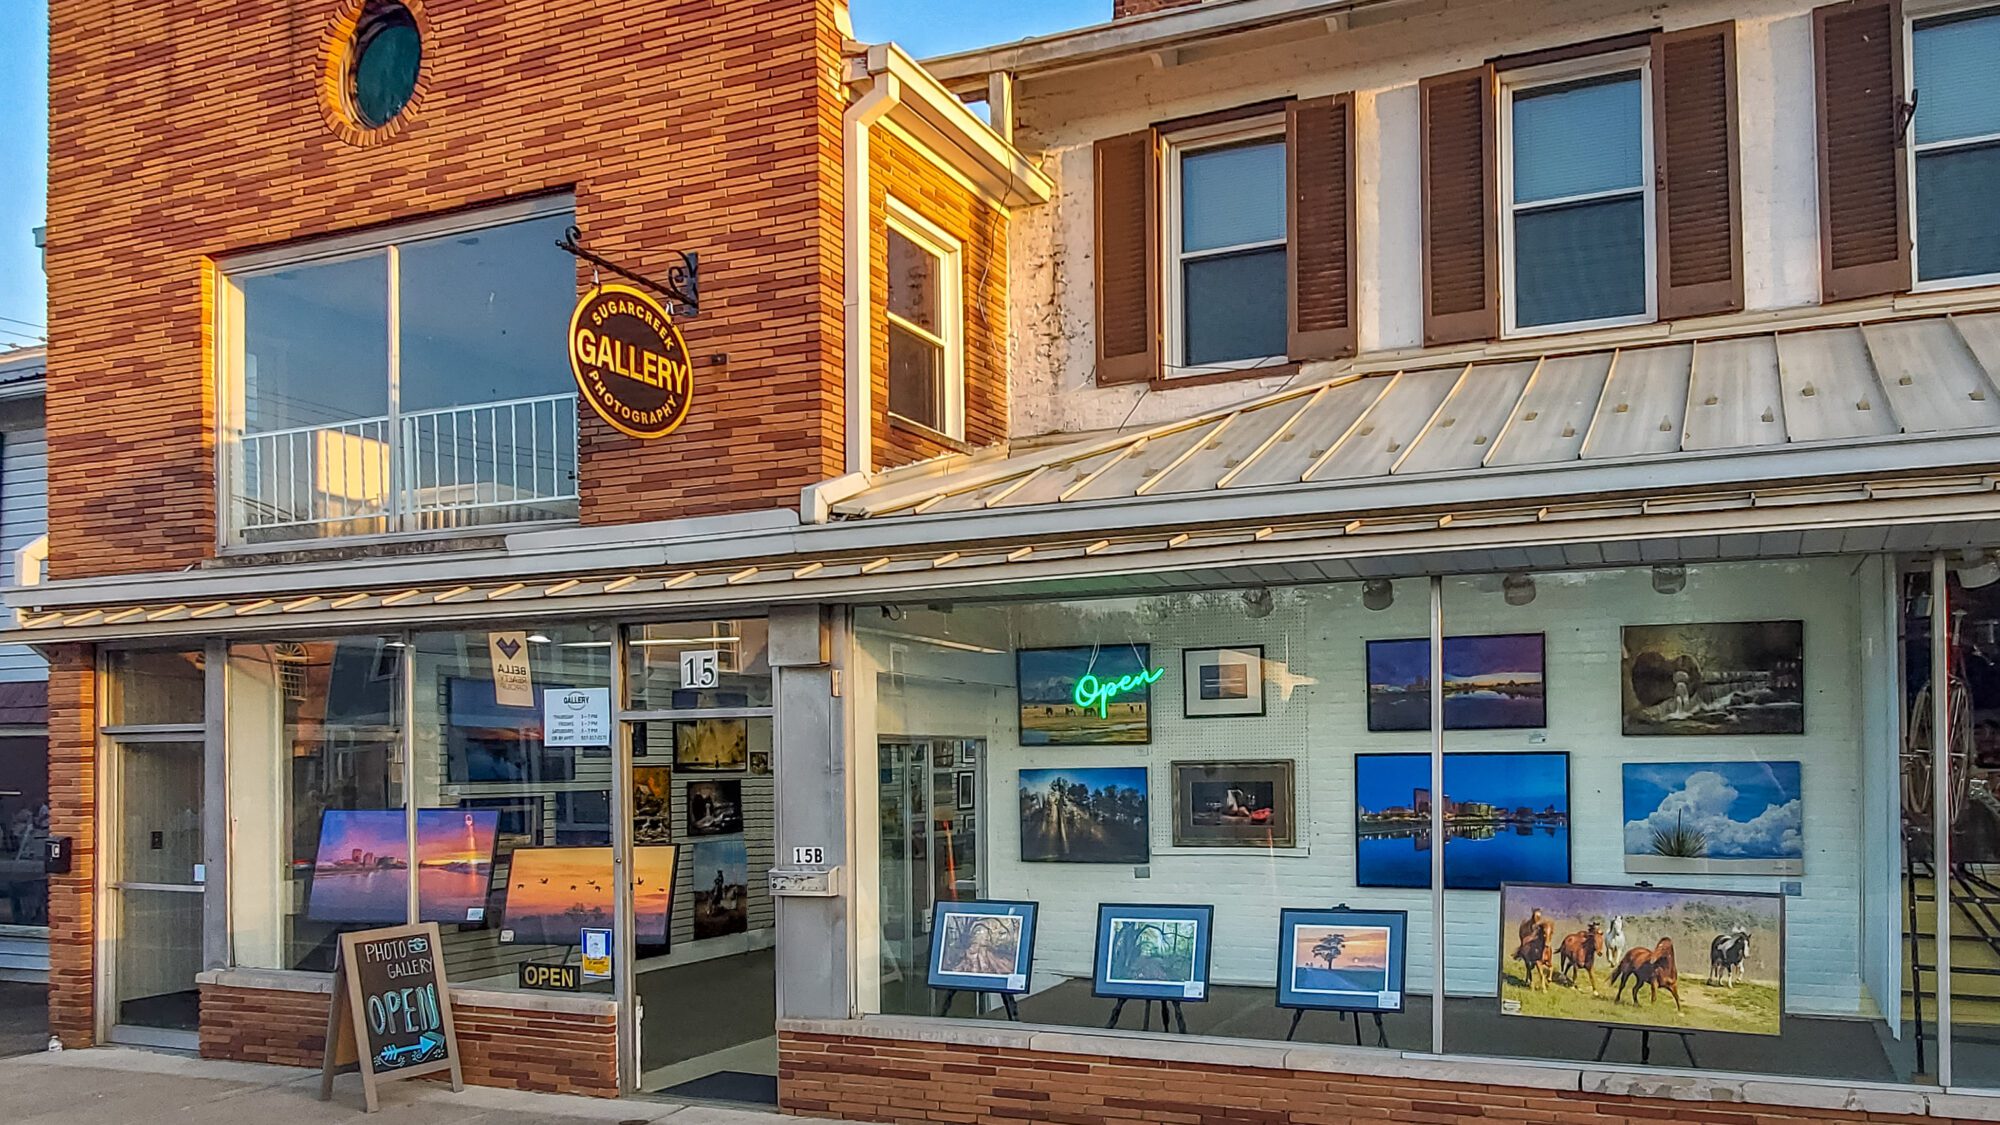 Sugarcreek Photography Gallery in Bellbrook Ohio selling 200 framed art prints in canvas and metal finishes